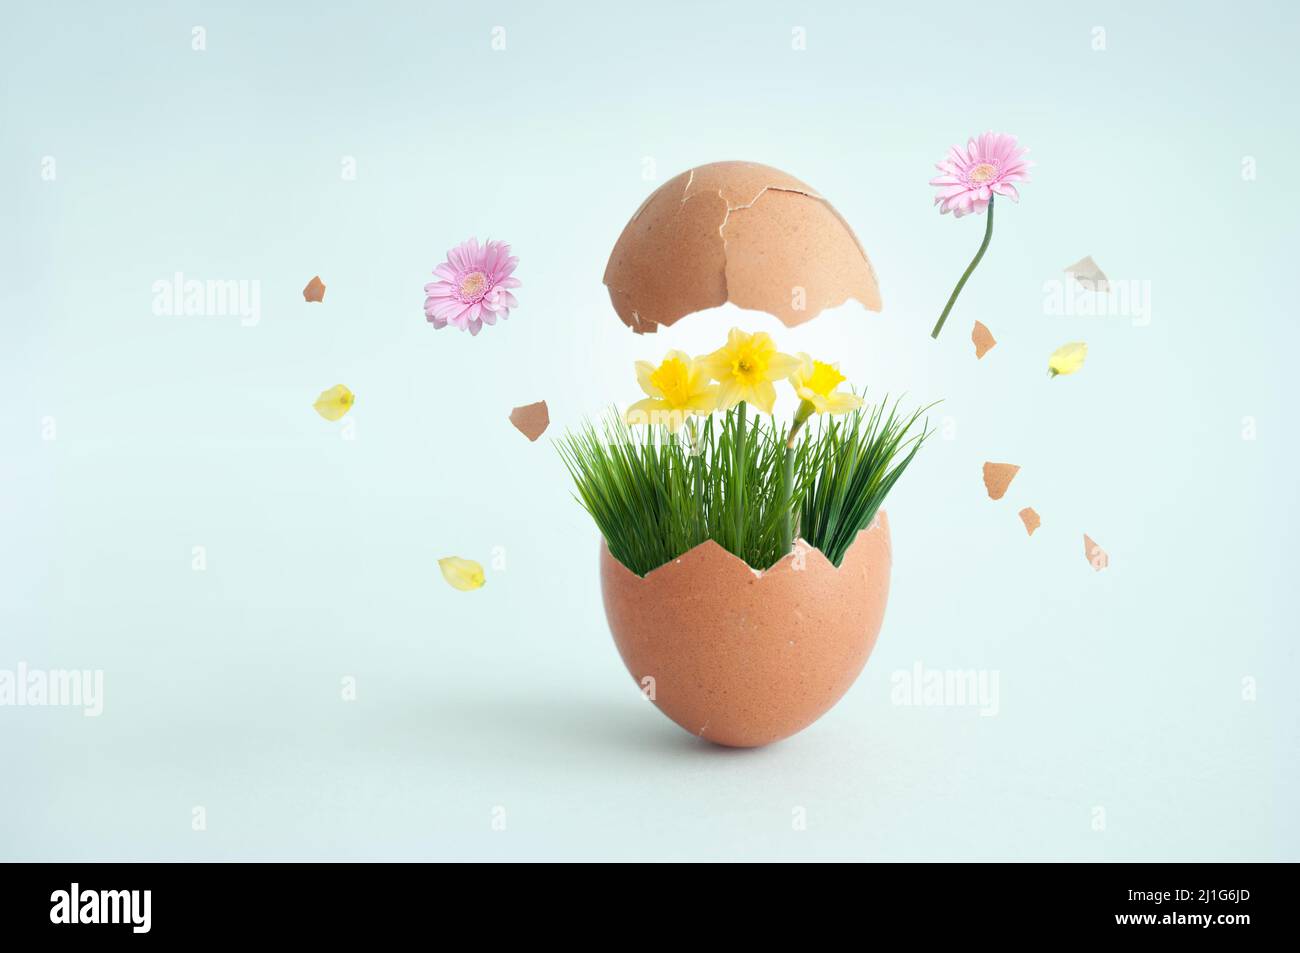 Egg breaking open with spring grass and flowers bursting out of shell Stock Photo